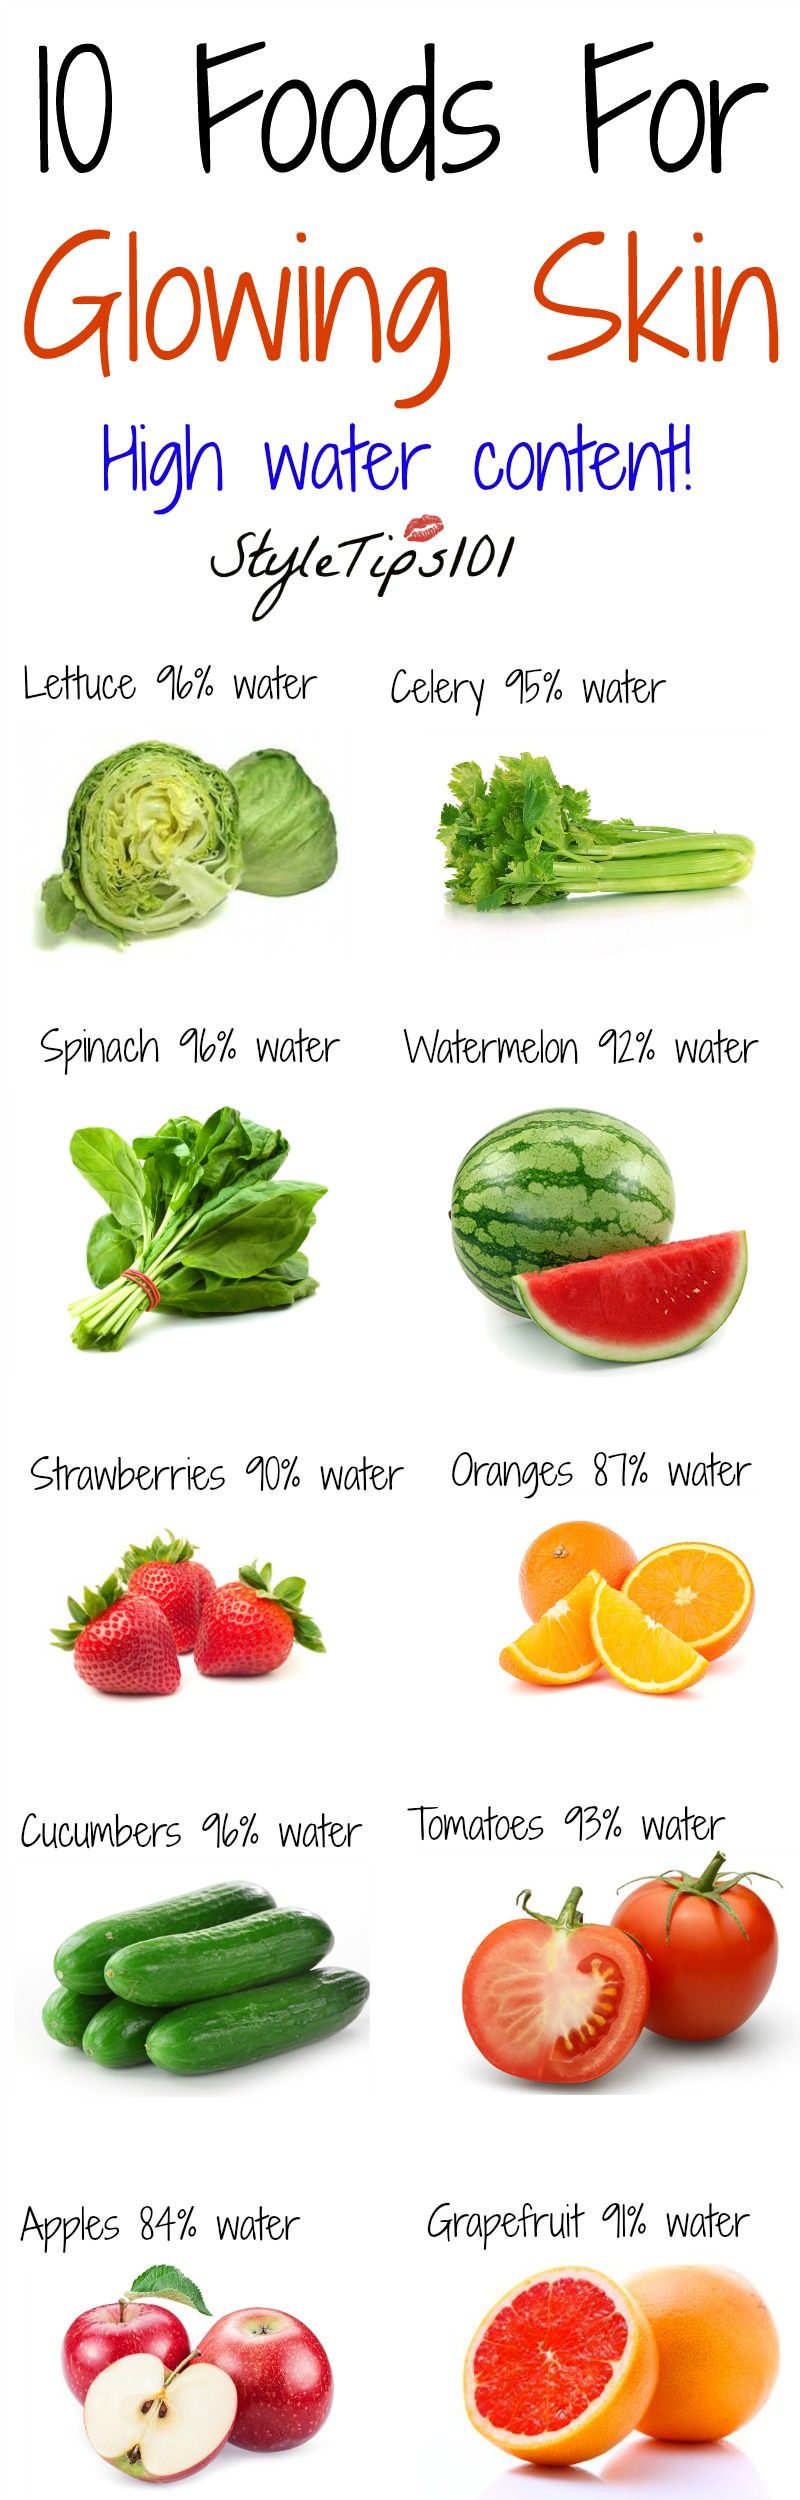 Foods For Glowing Skin